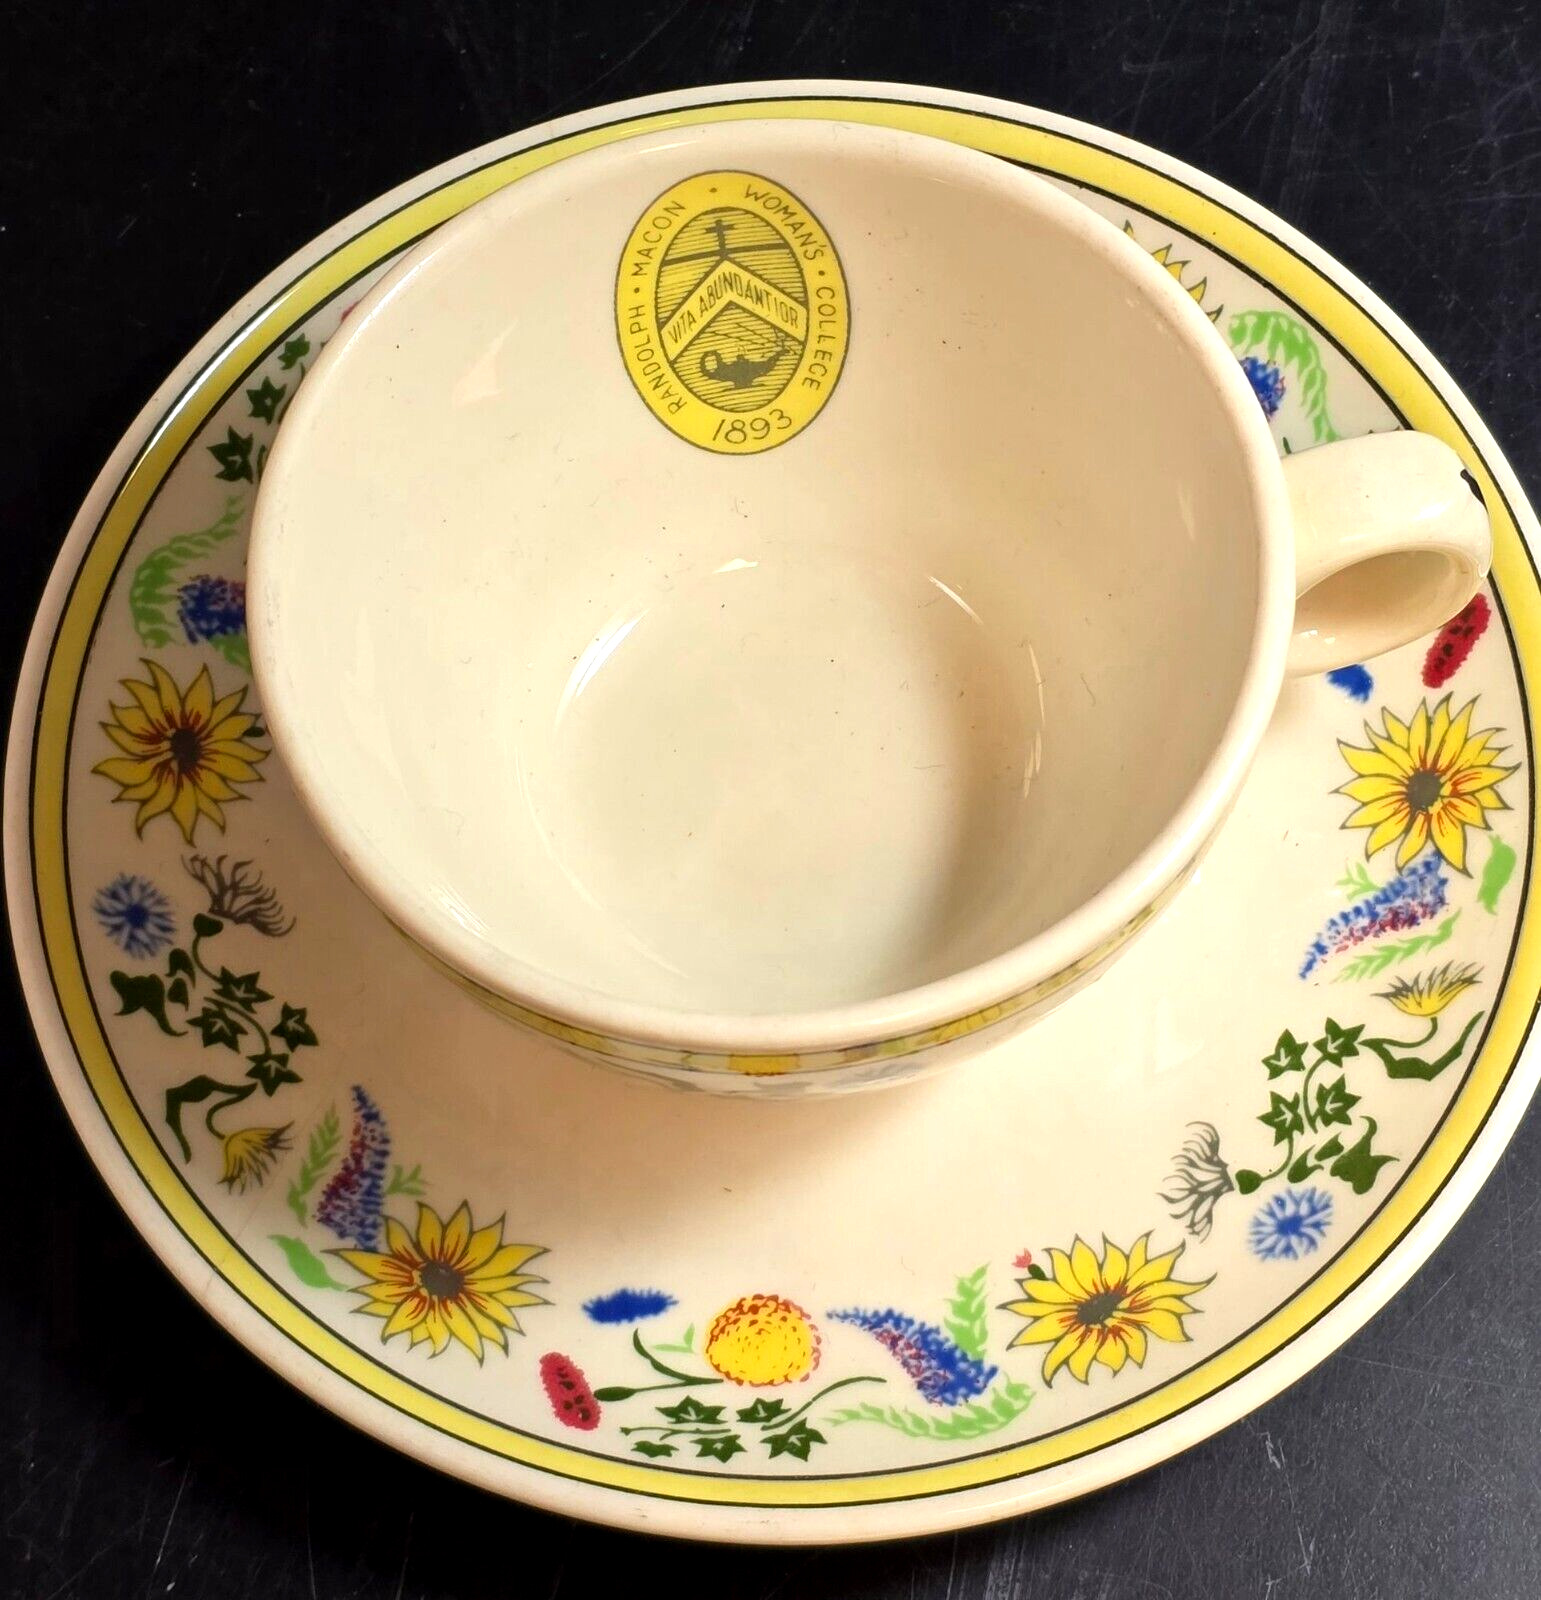 Vintage RANDOLPH MACON WOMEN'S COLLEGE Catherine MOOMAW Mayer China Cup & Saucer